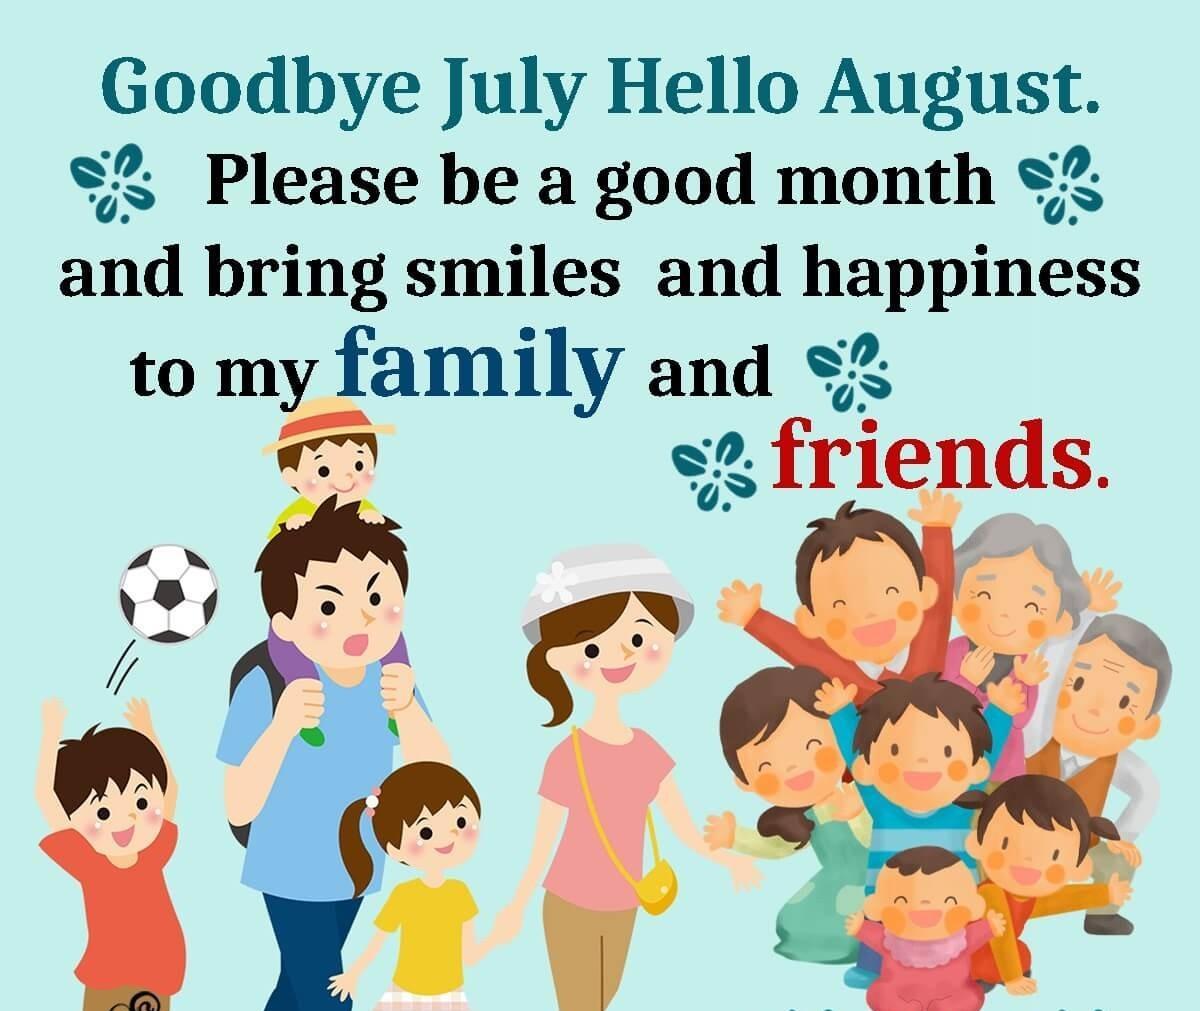 Goodbye July Hello August Images